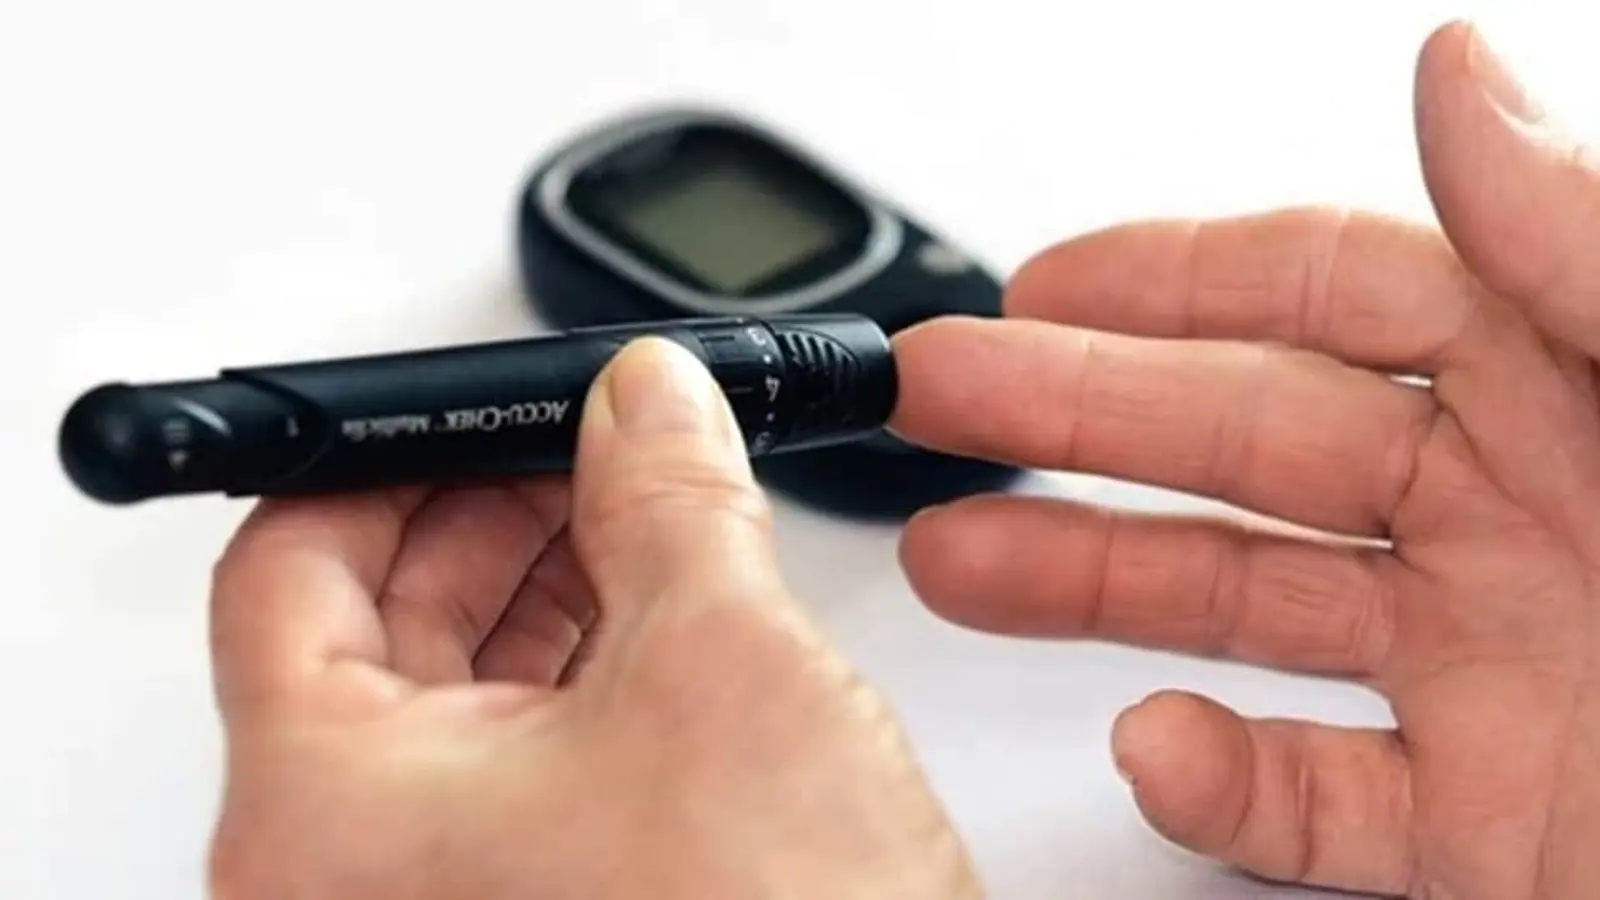 Covid-19 increases risk of type 2 diabetes: Study